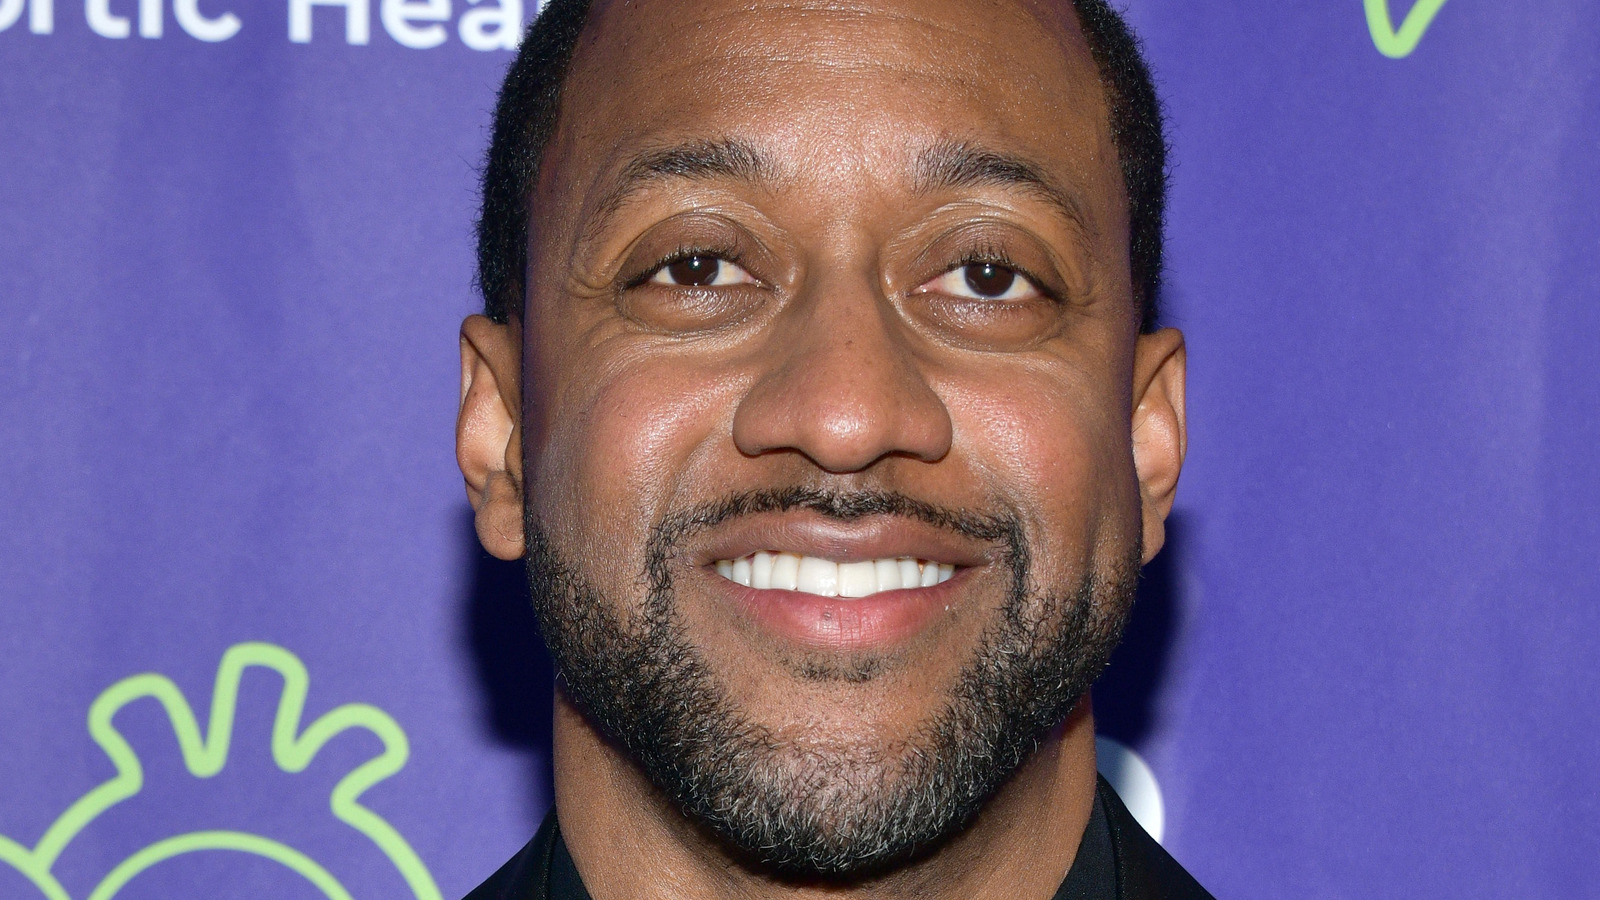 Family Matters Star Jaleel White Had A Complicated Personal Life